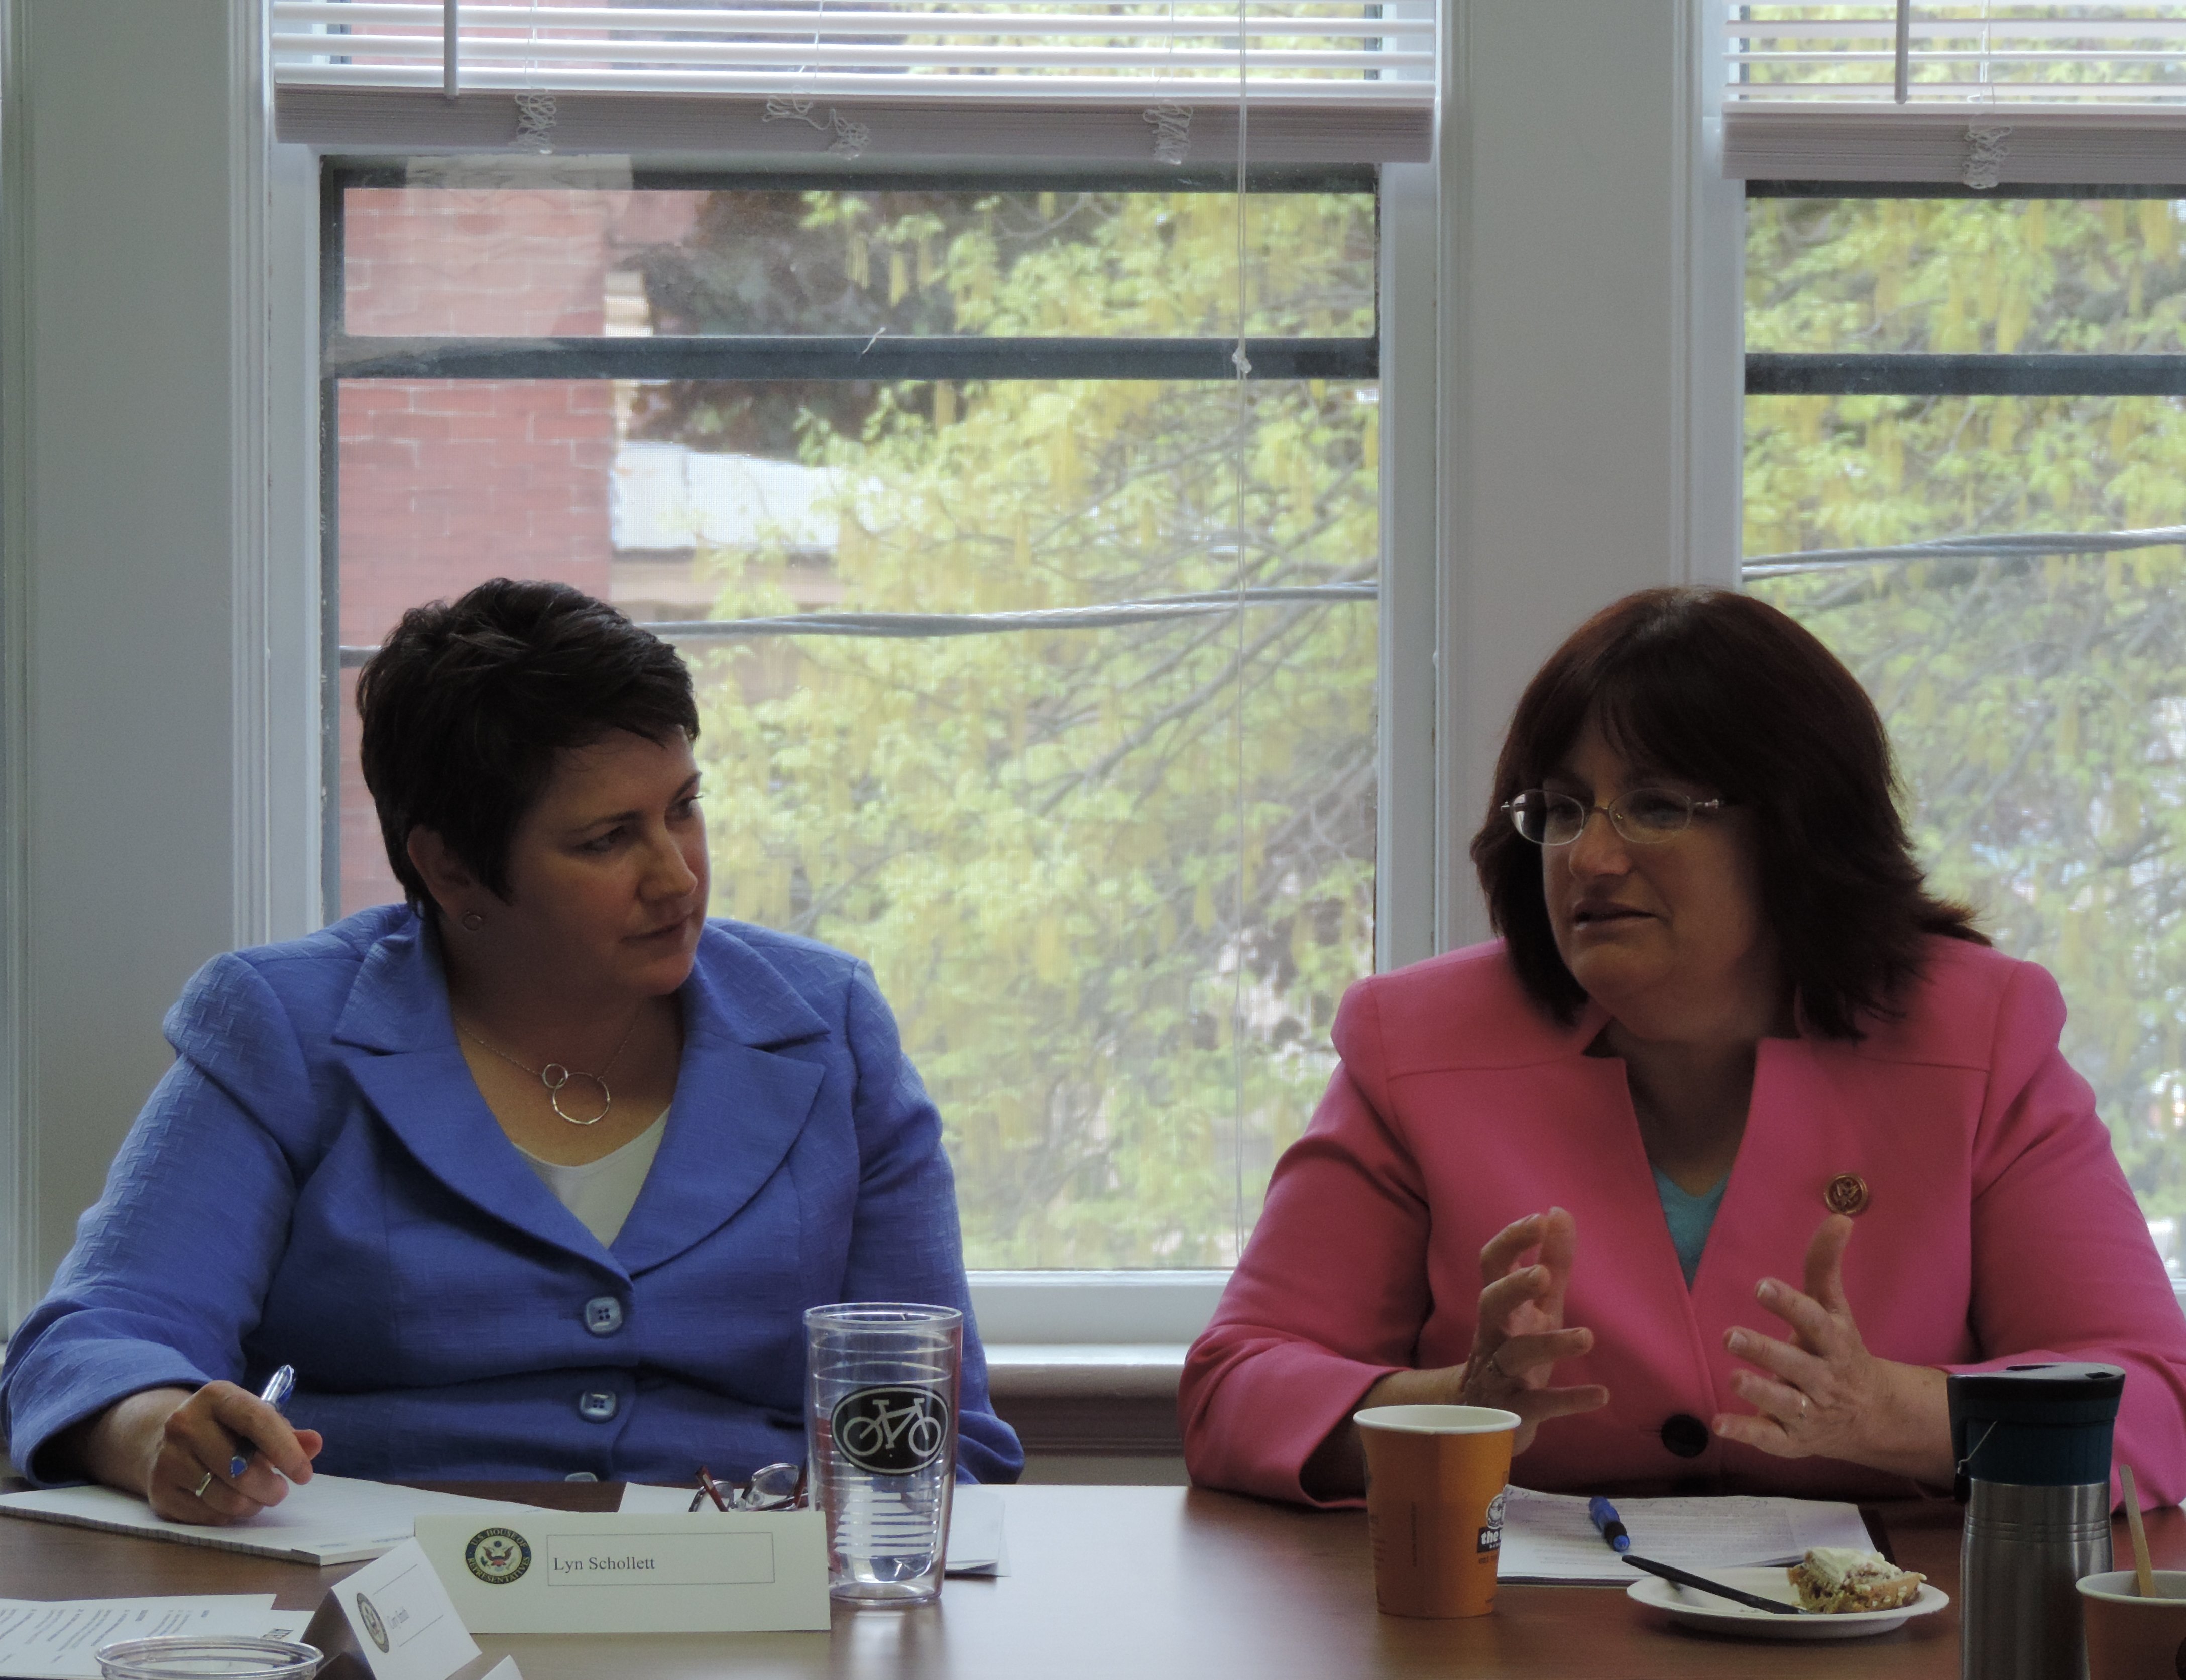 Congresswoman Kuster discusses efforts to curb human trafficking around the globe